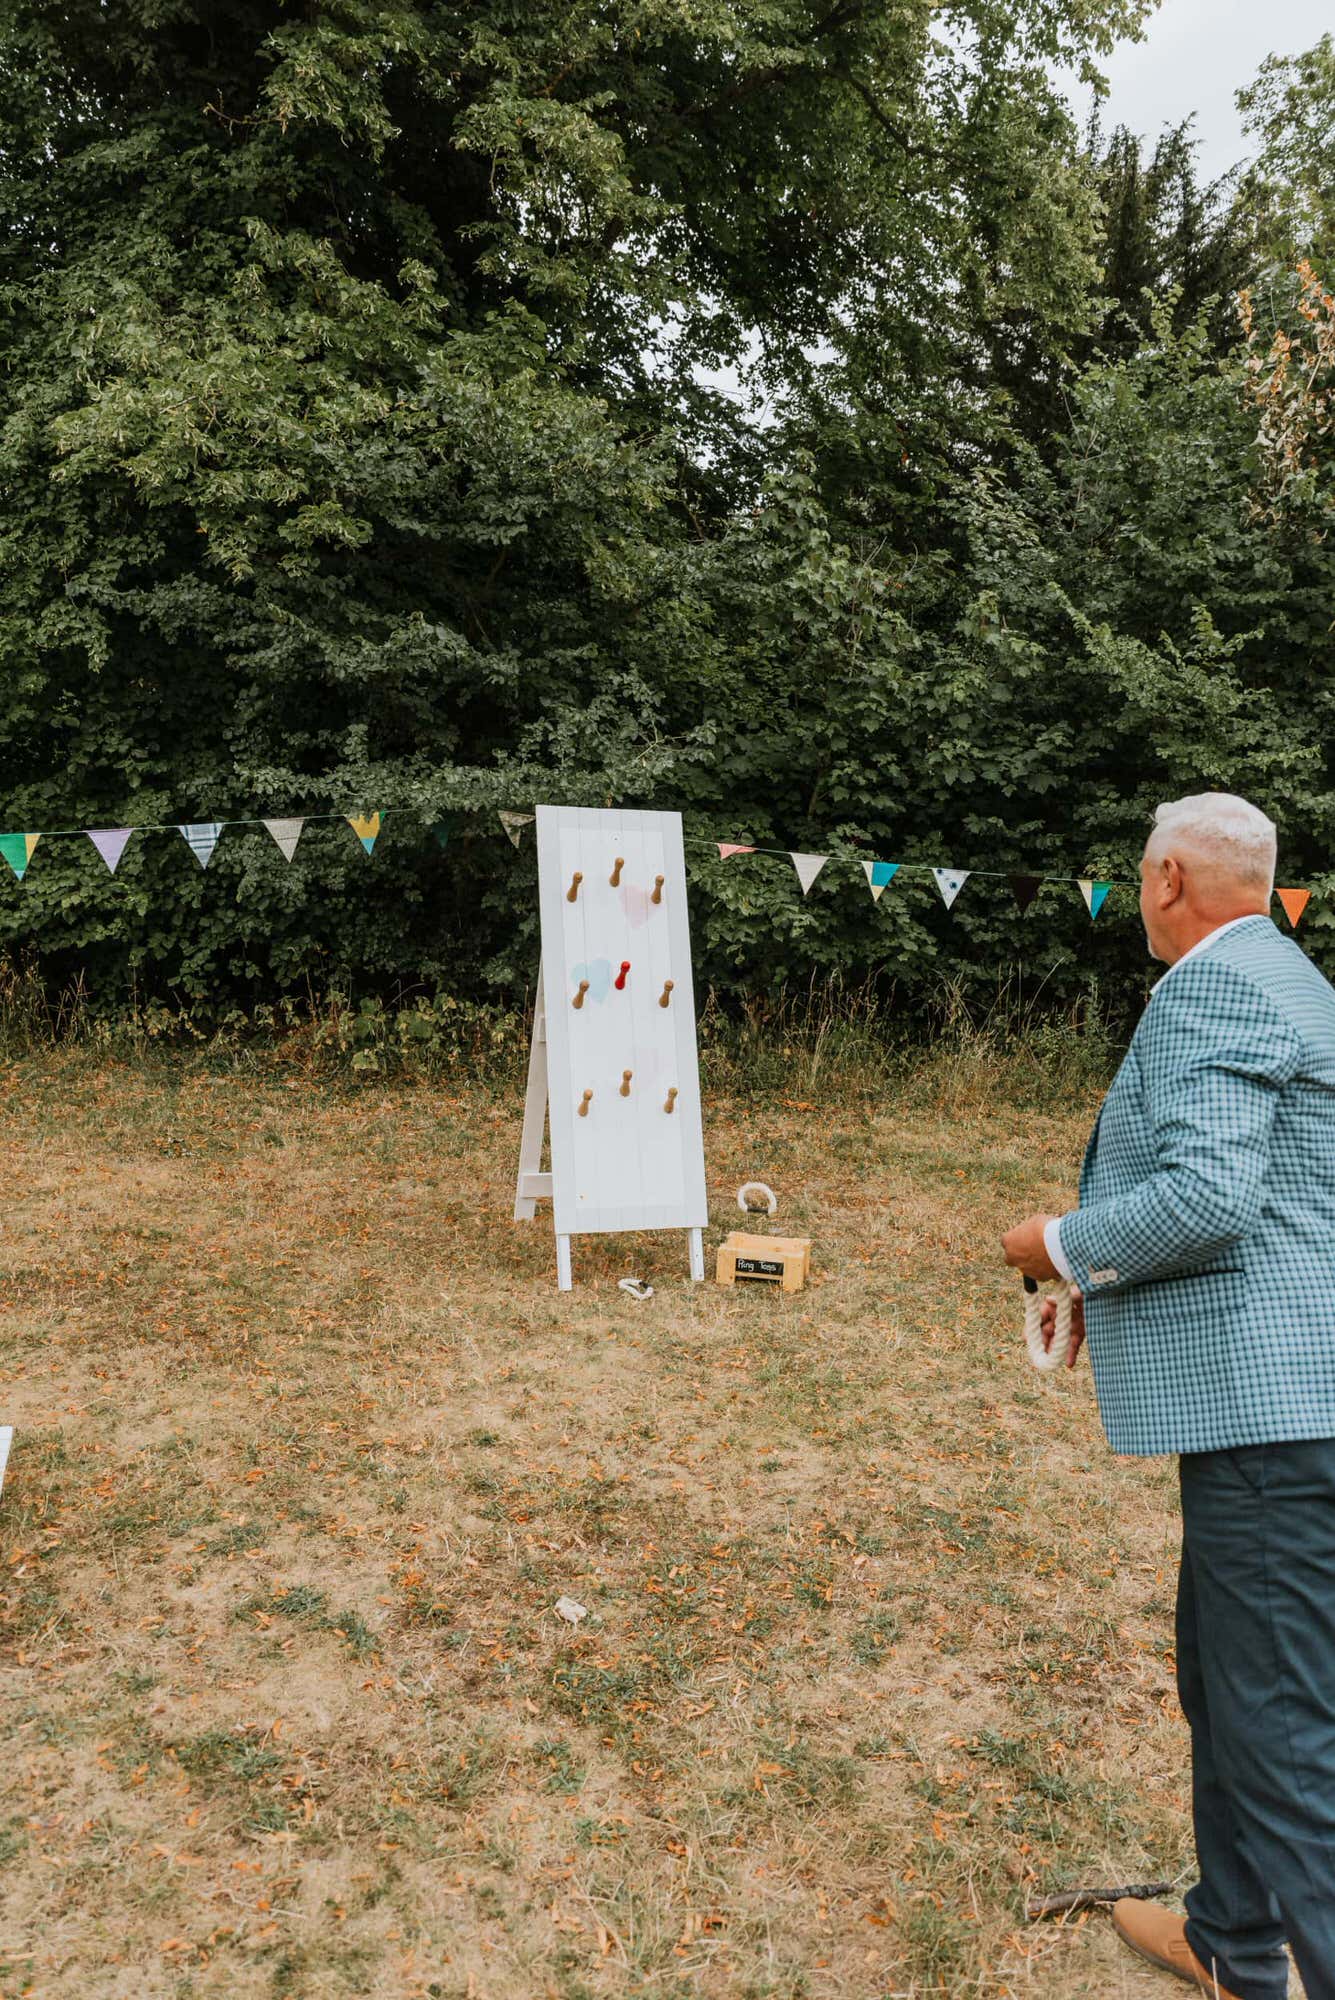 lawn games in the wedding